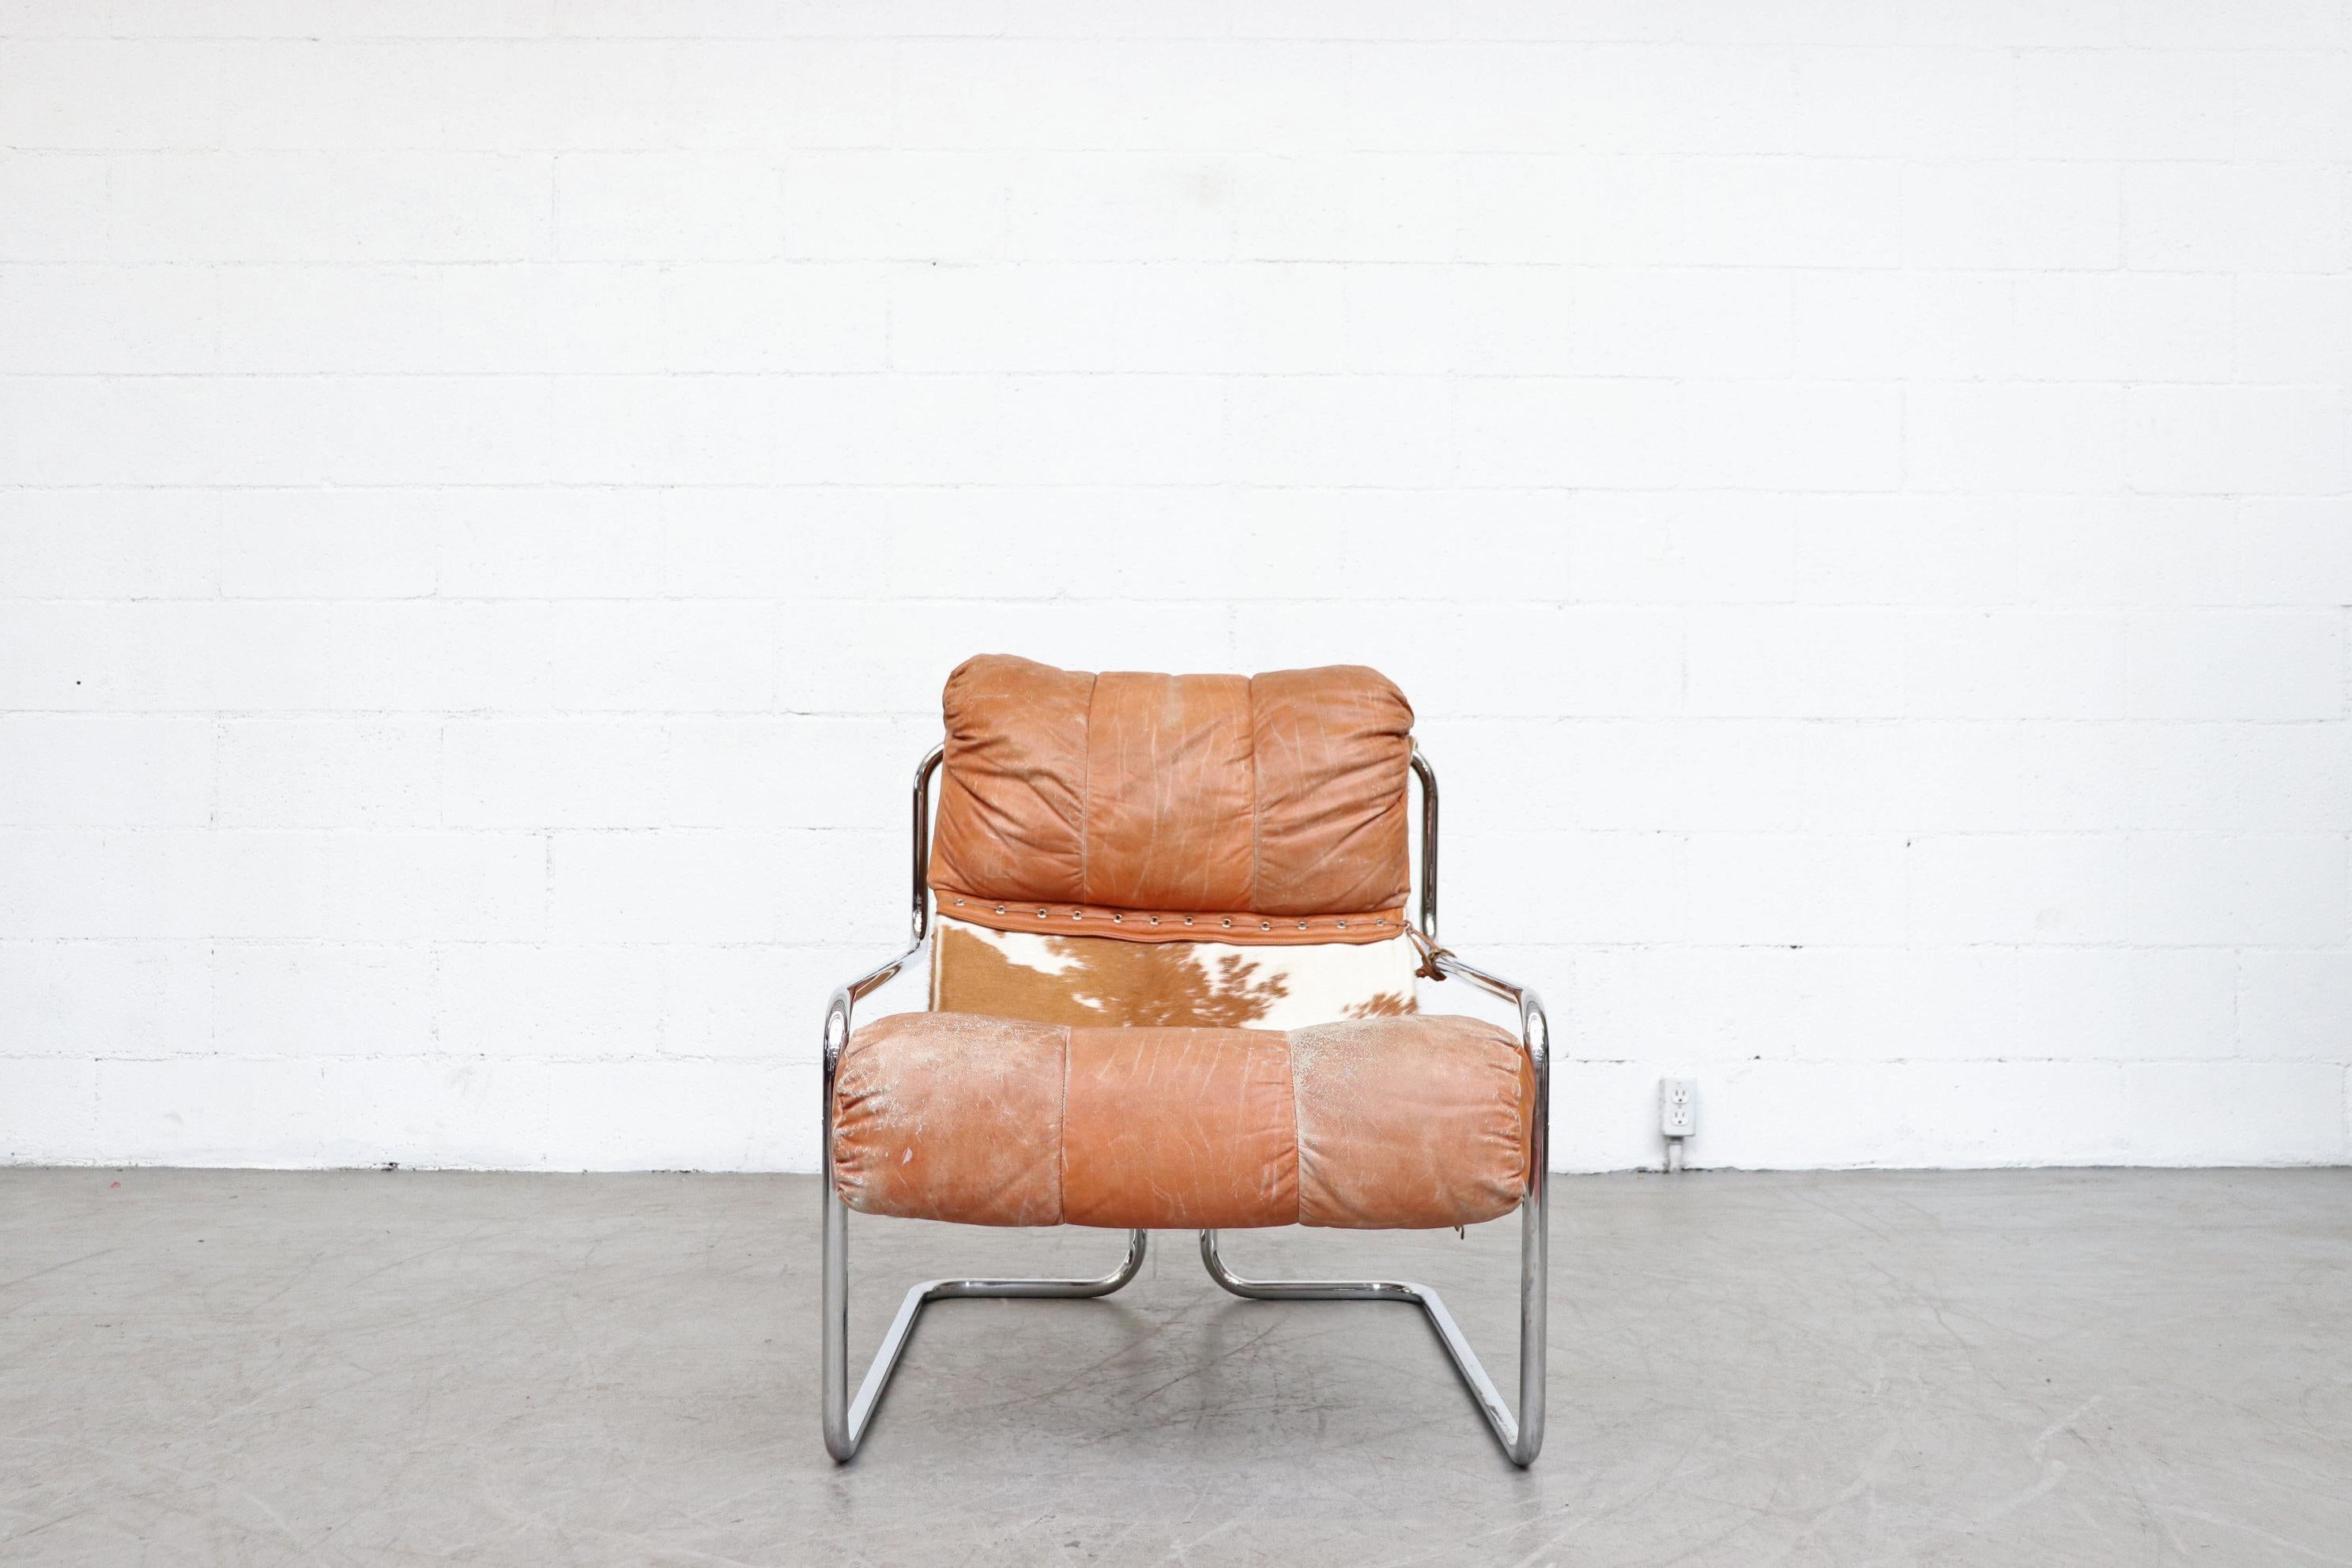 Guido Faleschini leather and cowhide lounge chair with tubular chrome frame. Leather in very used condition with visible wear. It is unknown if this is the original design or modified or a prototype. Color may vary slightly from photo.